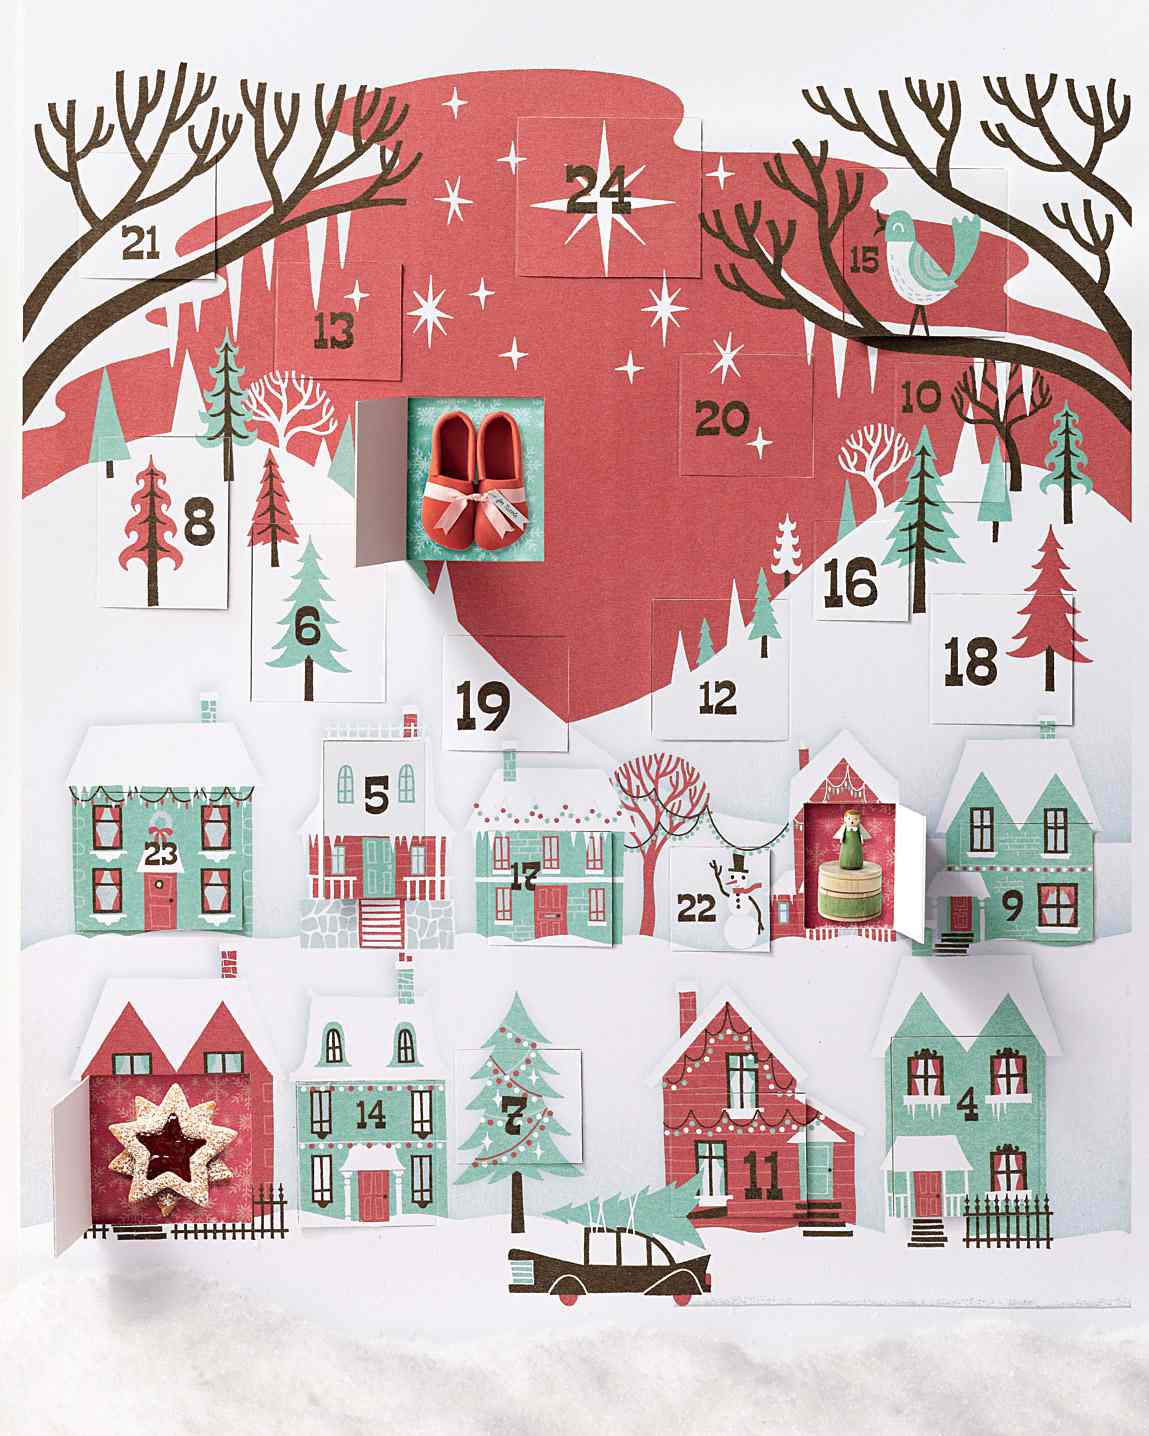 Count down days of Christmas with this Advent Calendar American Greetings winter 